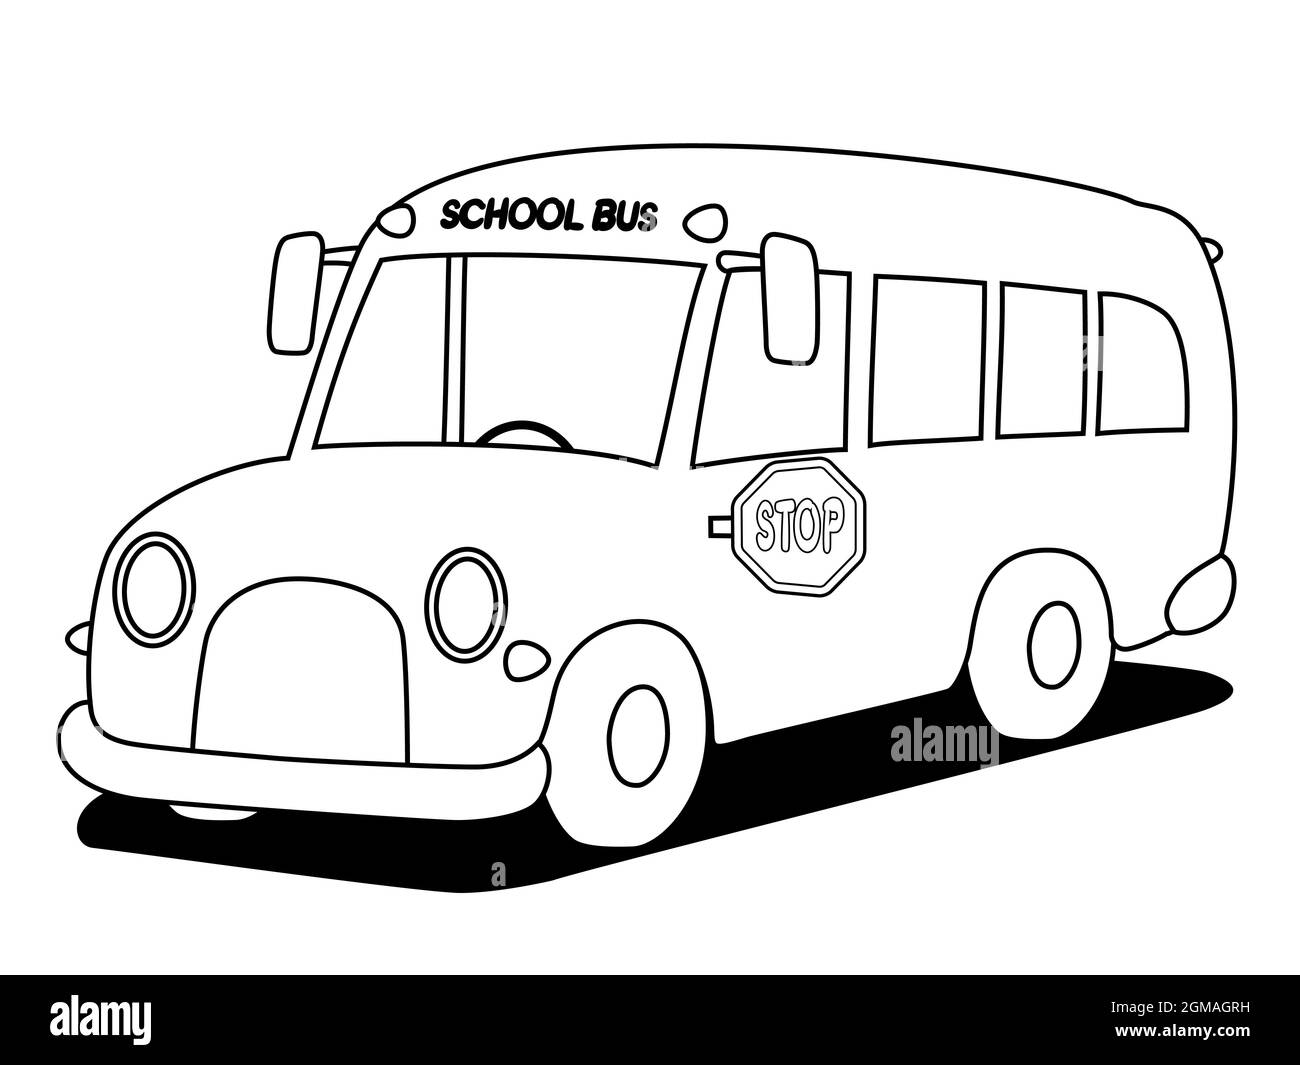 School bus black and white stock photos images